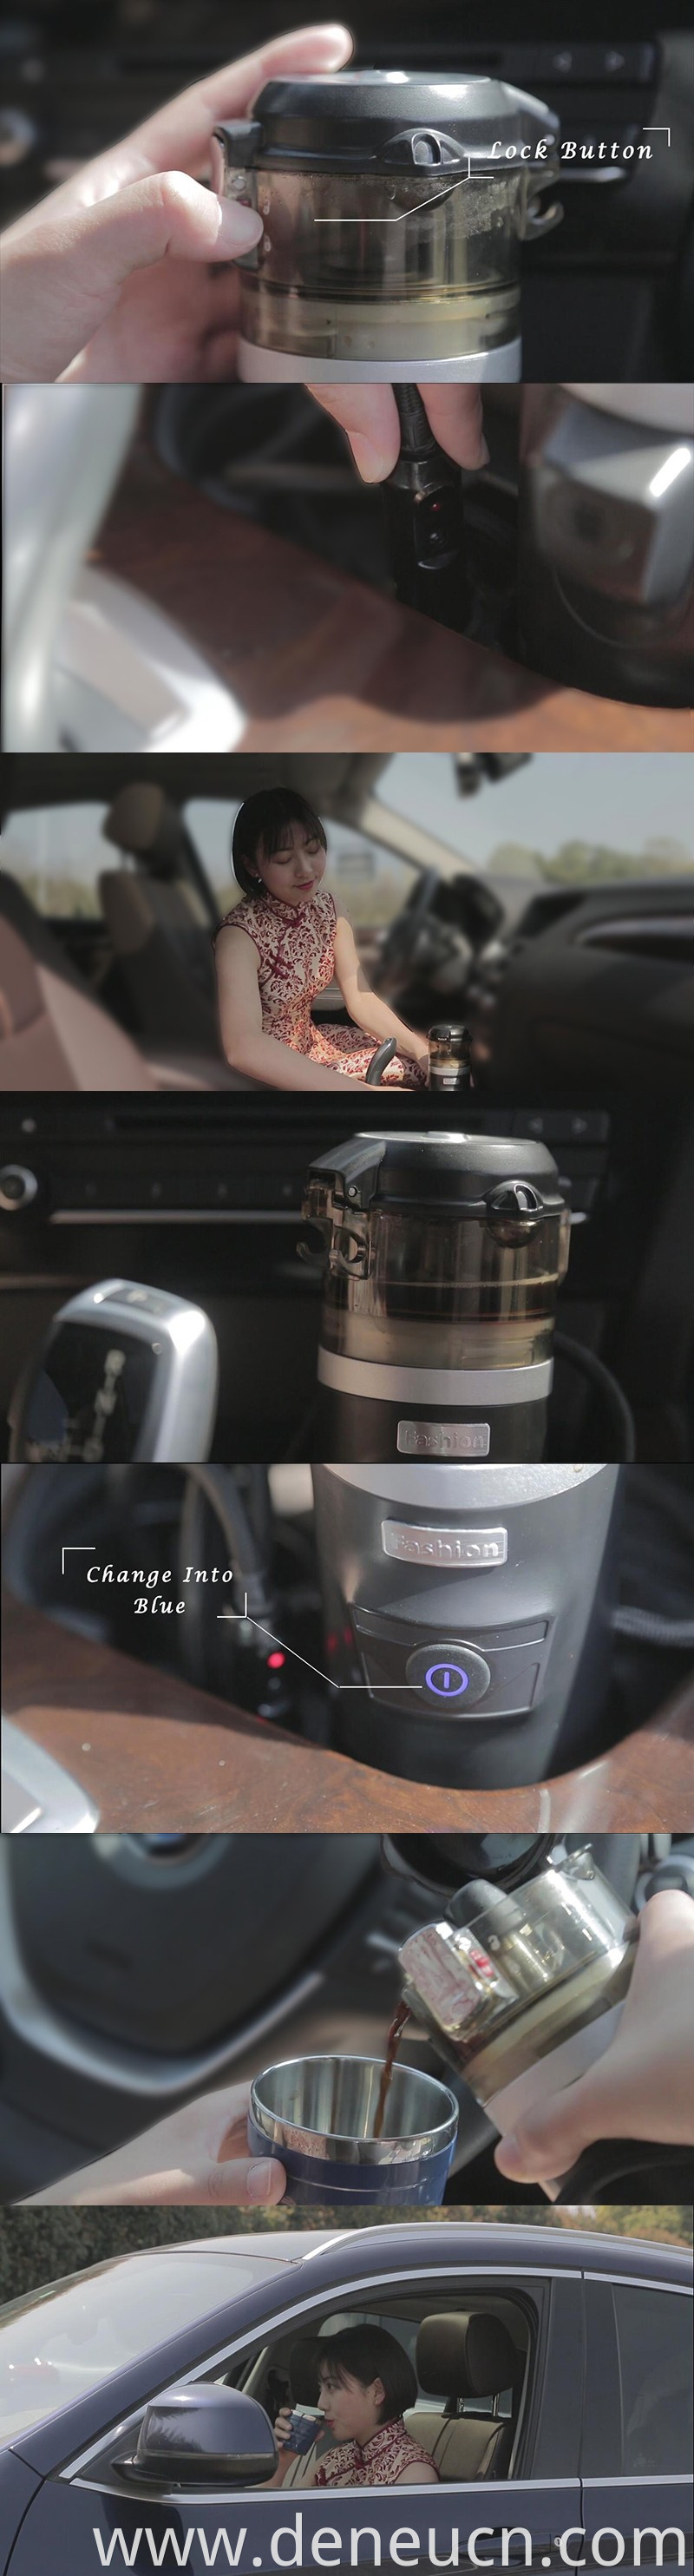 mini camp portable for car use 12V electric espresso coffee maker for coffee pod or ground coffee in fast cooking